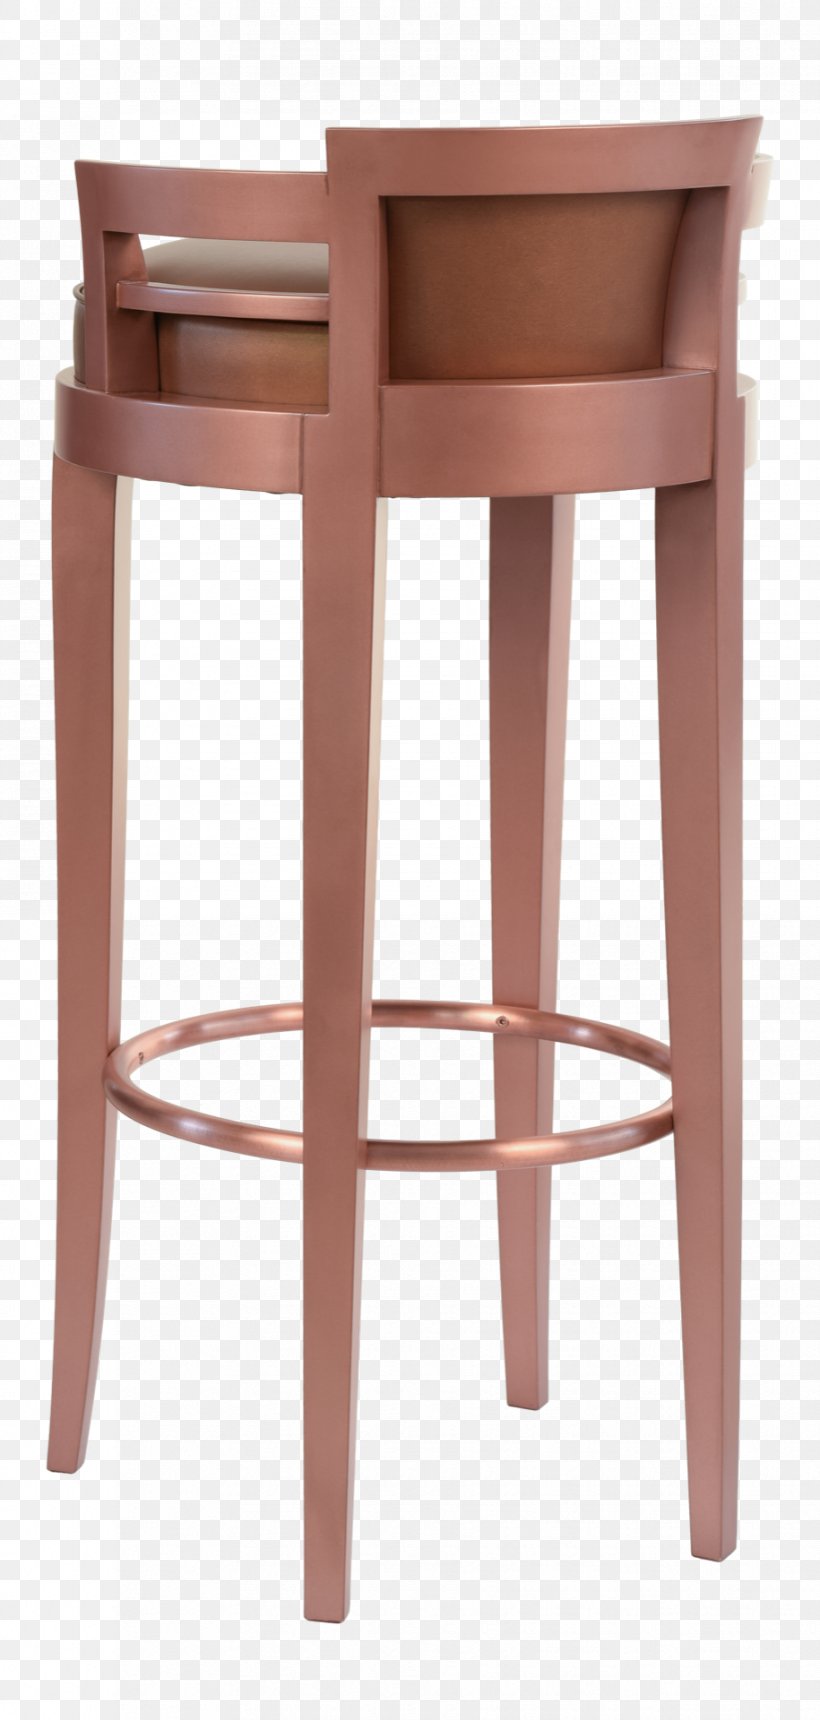 Bar Stool Chair Furniture Table, PNG, 915x1920px, Bar Stool, Chair, End Table, Furniture, Stool Download Free